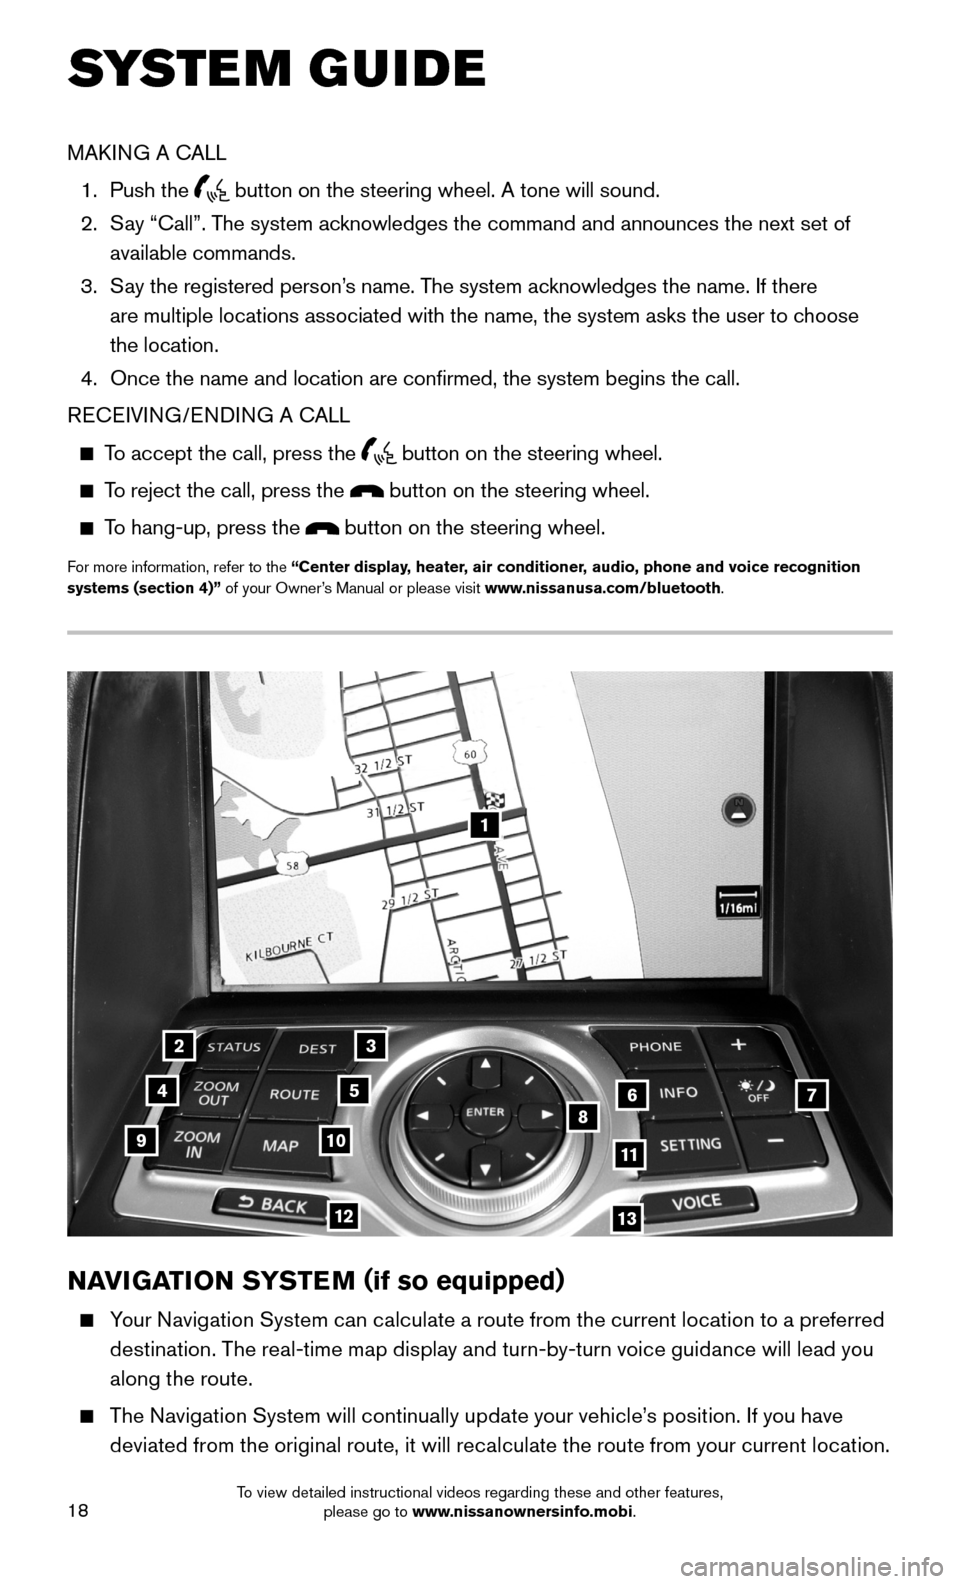 NISSAN 370Z COUPE 2015 Z34 Quick Reference Guide 18
1
23
4567891011
1213
NAVIGATION SYSTEM (if so equipped)
     Your Navigation System can calculate a route from the current location to a preferred 
destination. The real-time map display and turn-b